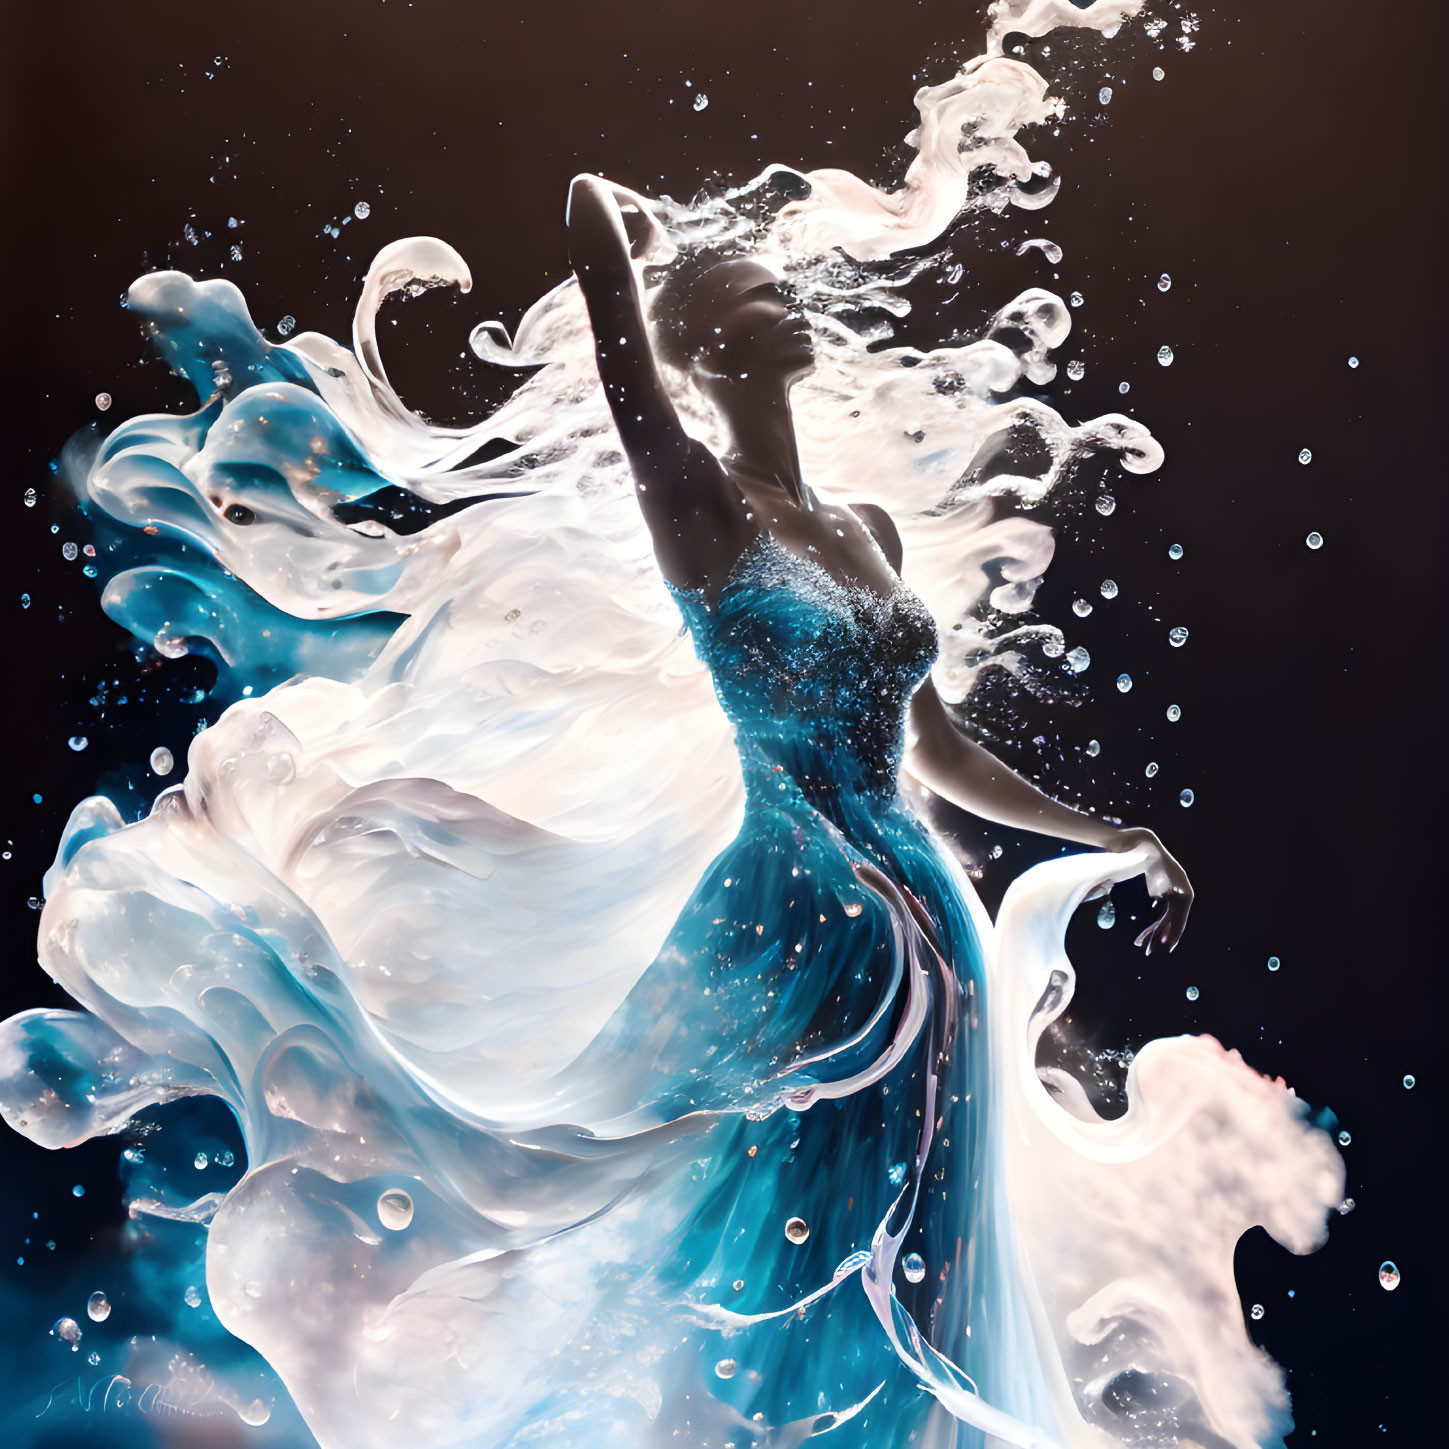 Silhouette of woman in flowing dress with water splashes on dark background